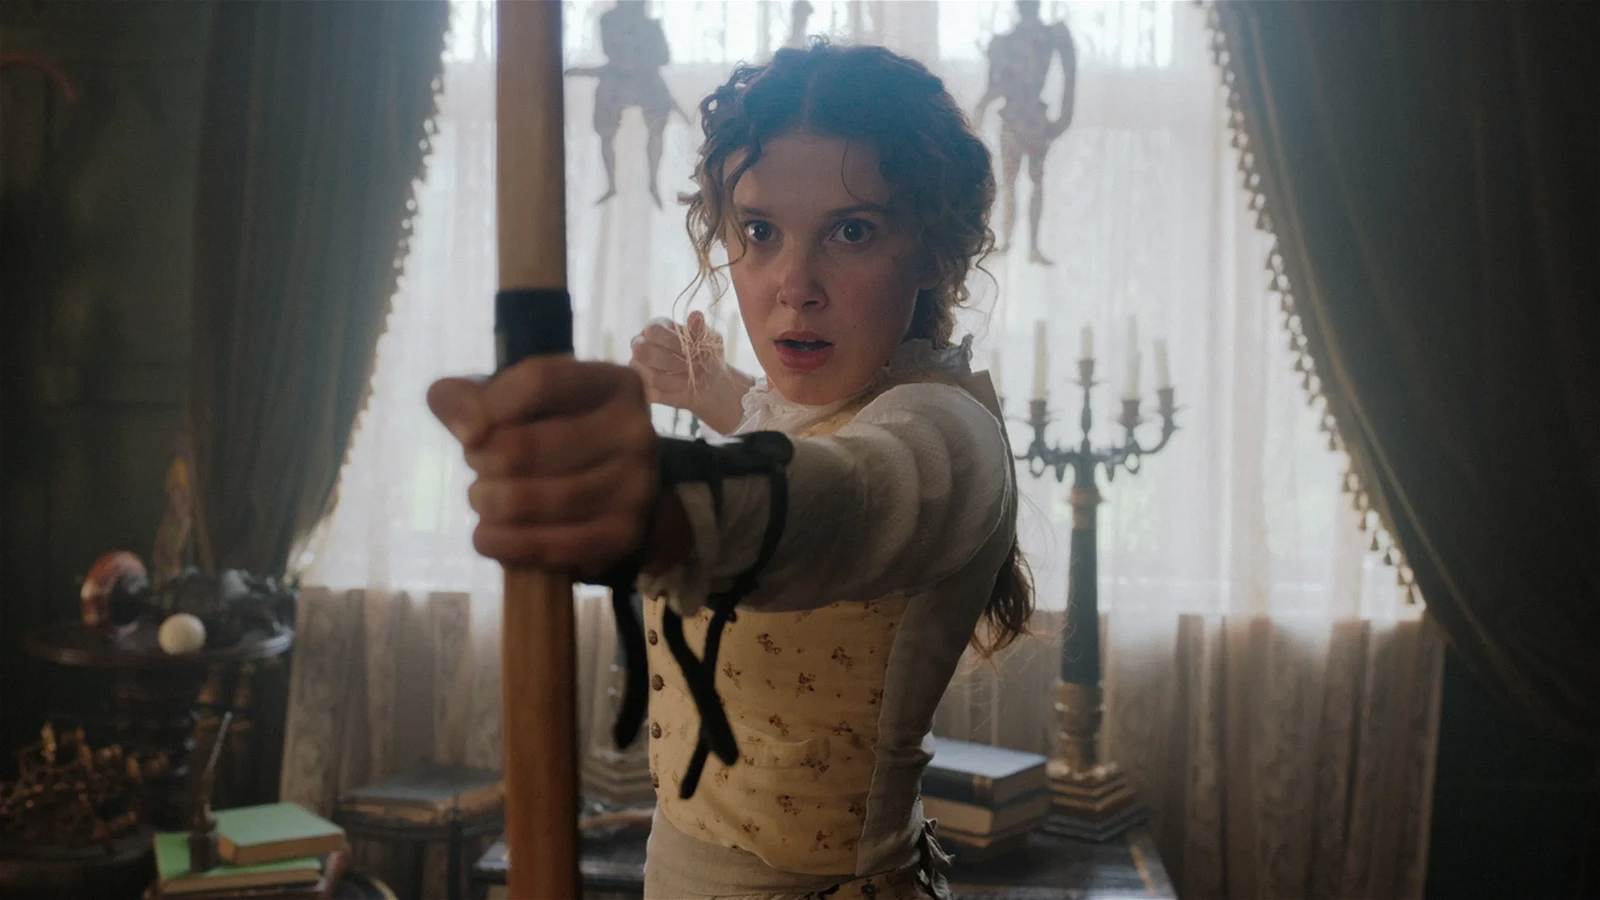 Millie Bobby Brown in a still from Enola Holmes 